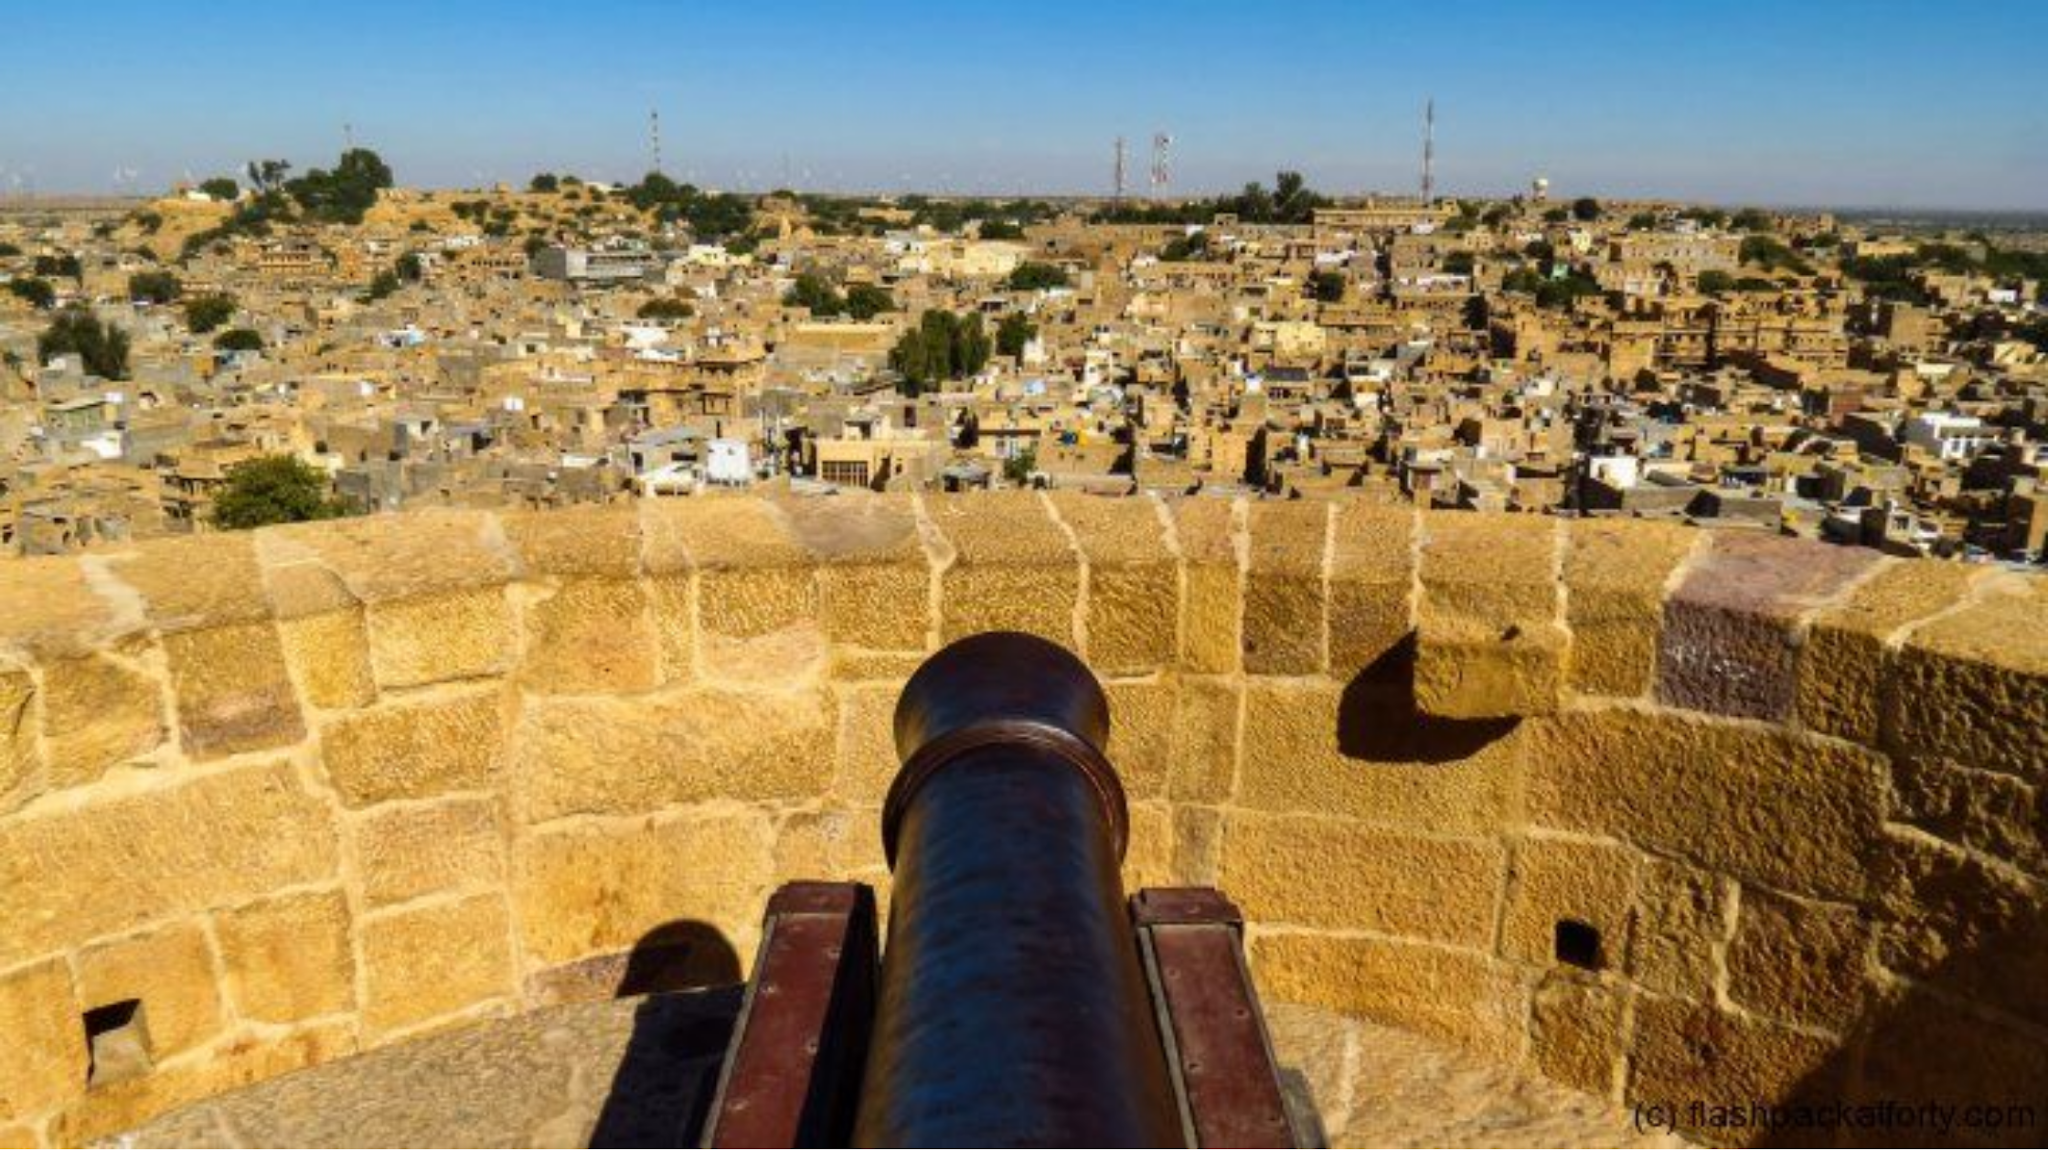 Fort cannon and city view in Jaisalmer